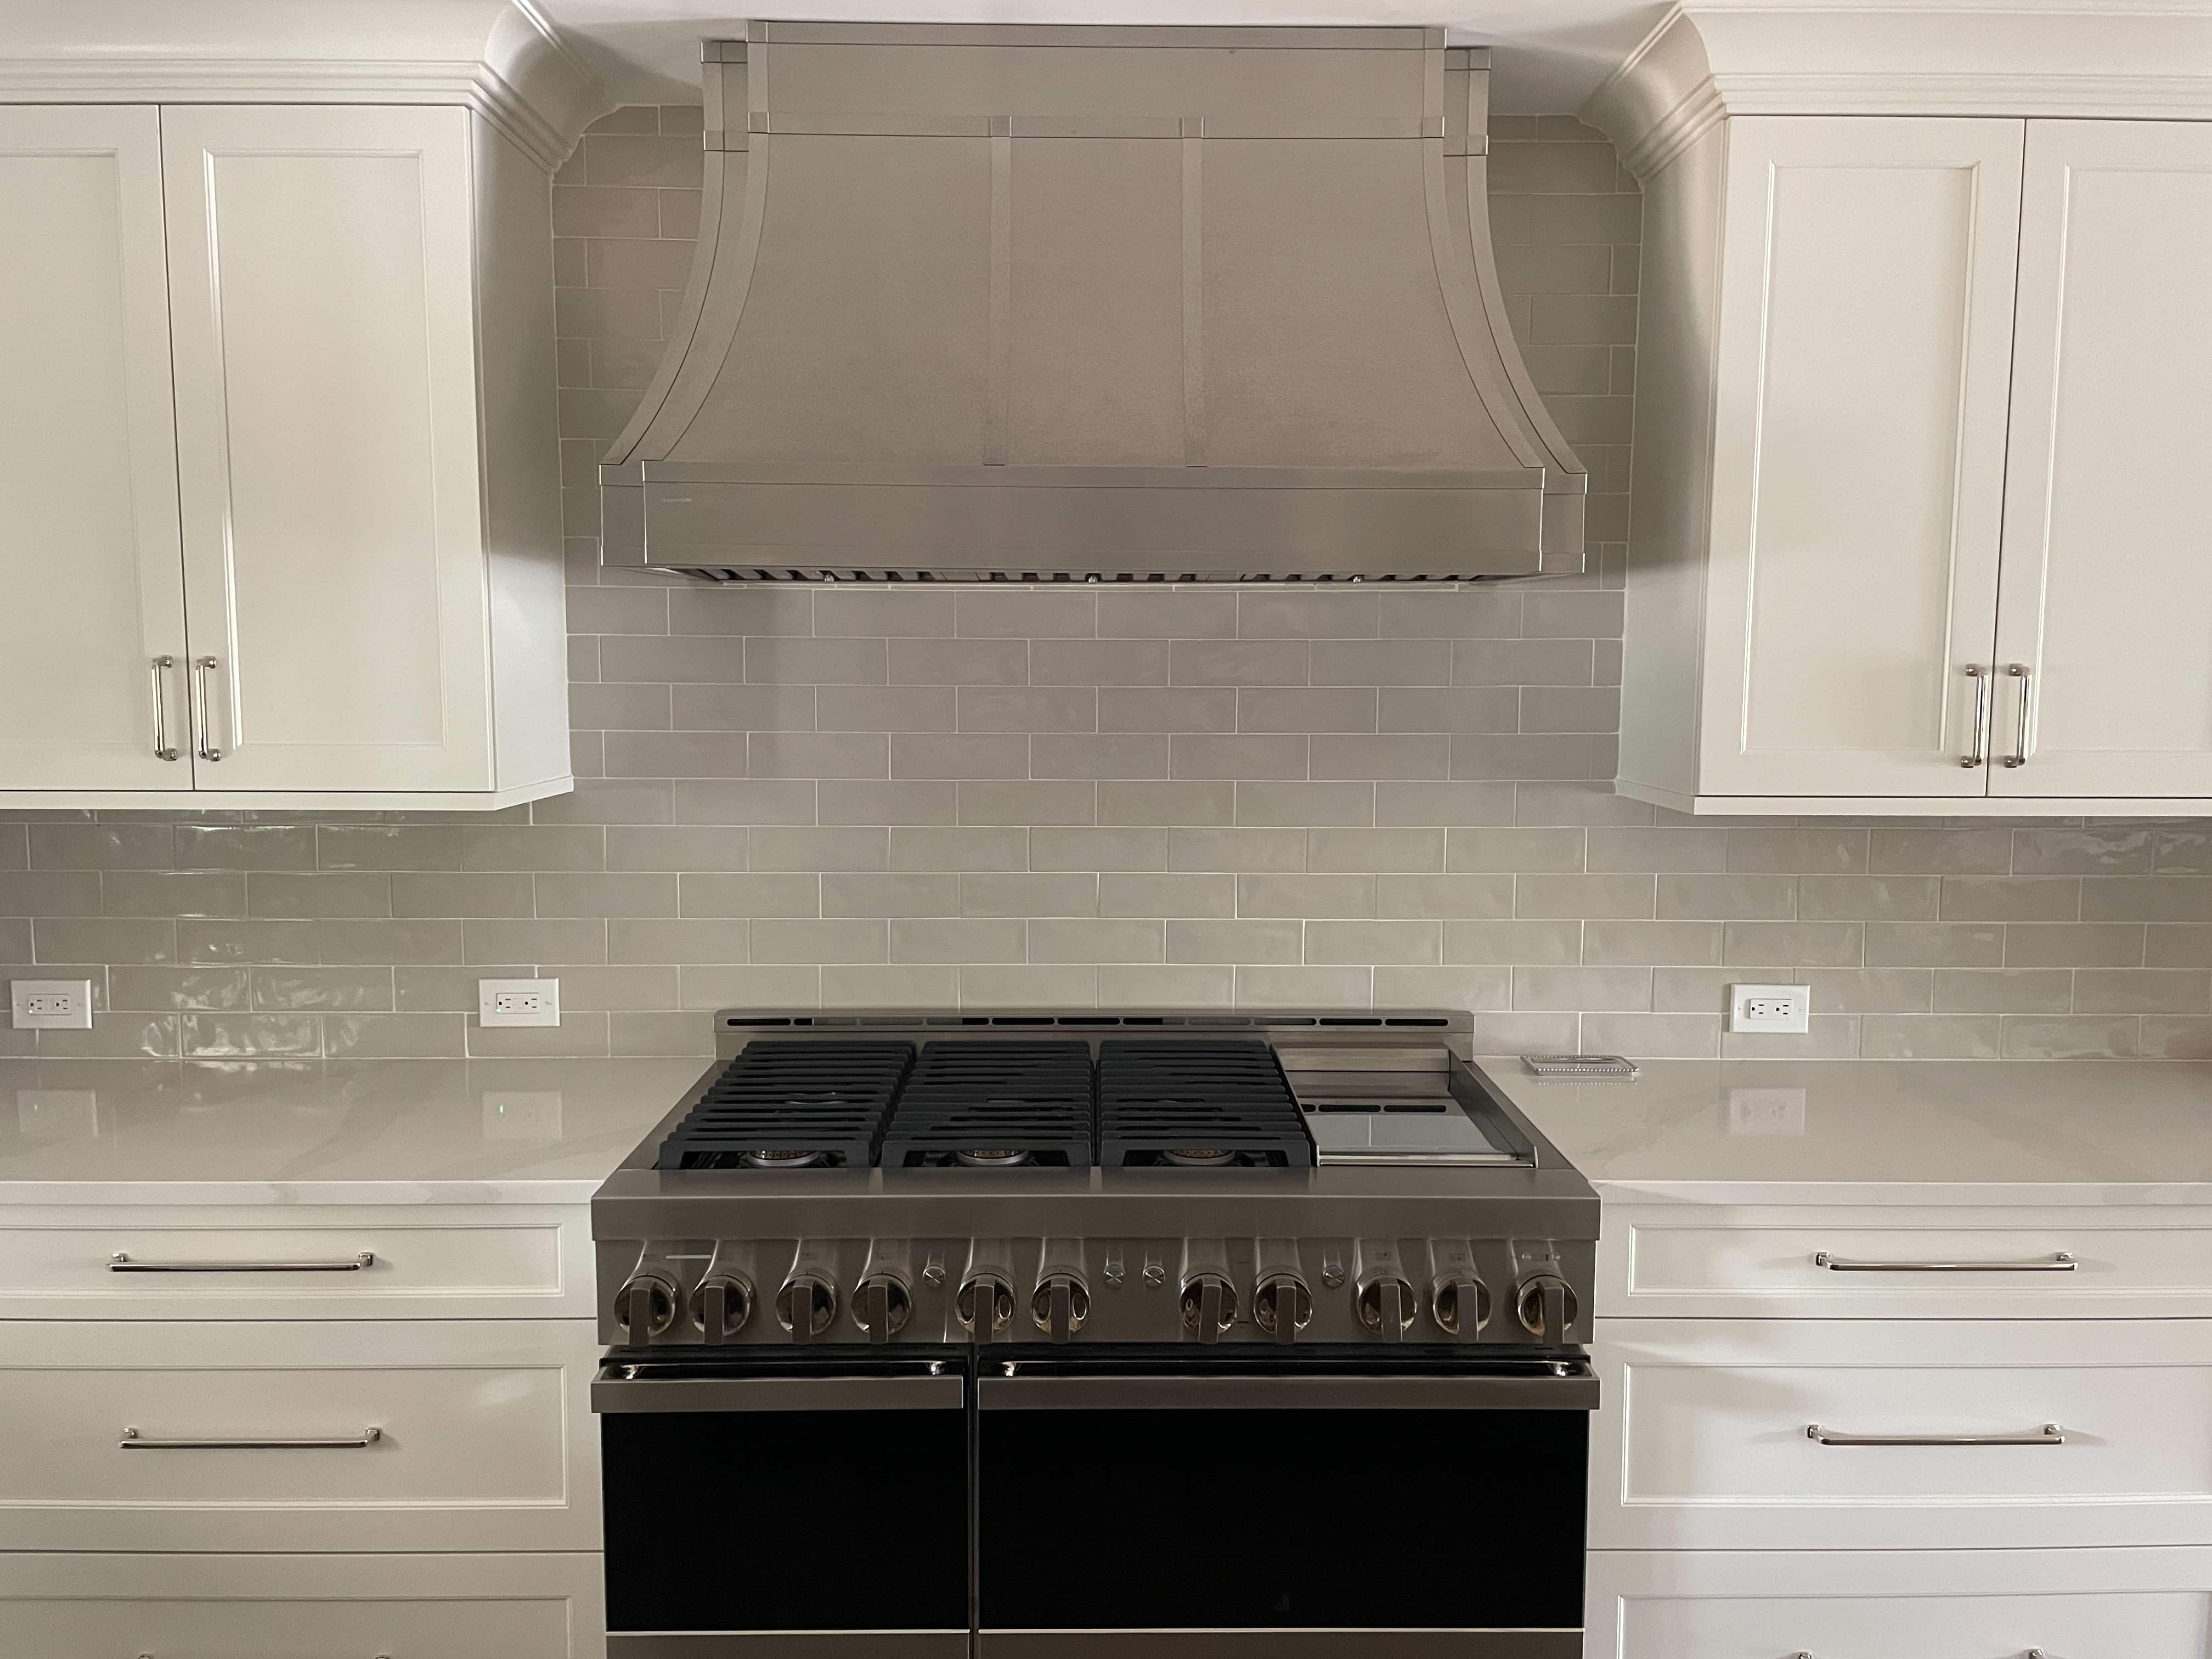 CopperSmith Designer DS6 Brushed Stainless Steel Kitchen Range Hood with Straps in a classic style kitchen features white cabinets tile backsplash white countertops 